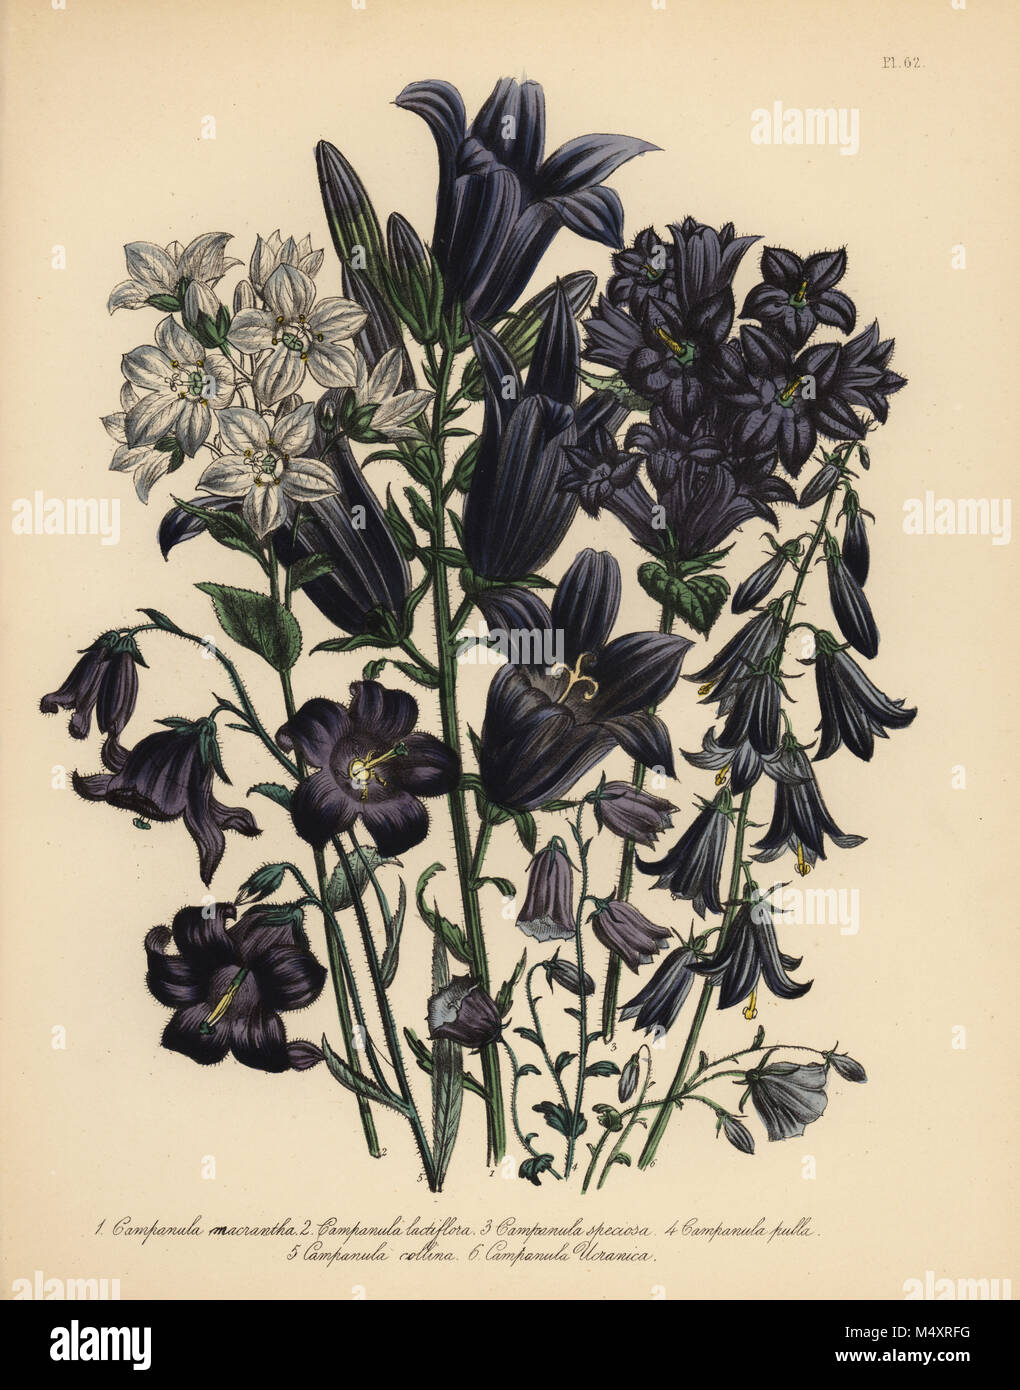 Large-flowered campanula, Campanula macrantha, milk-flowered campanula, C. lactiflora, showy bellflower, C. speciosa, dark-coloured campanula, C. pulla, hill campanula, C. collina, and Ukraine campanula, C. ucranica. Handfinished chromolithograph by Henry Noel Humphreys after an illustration by Jane Loudon from Mrs. Jane Loudon's Ladies Flower Garden of Ornamental Perennials, William S. Orr, London, 1849. Stock Photo